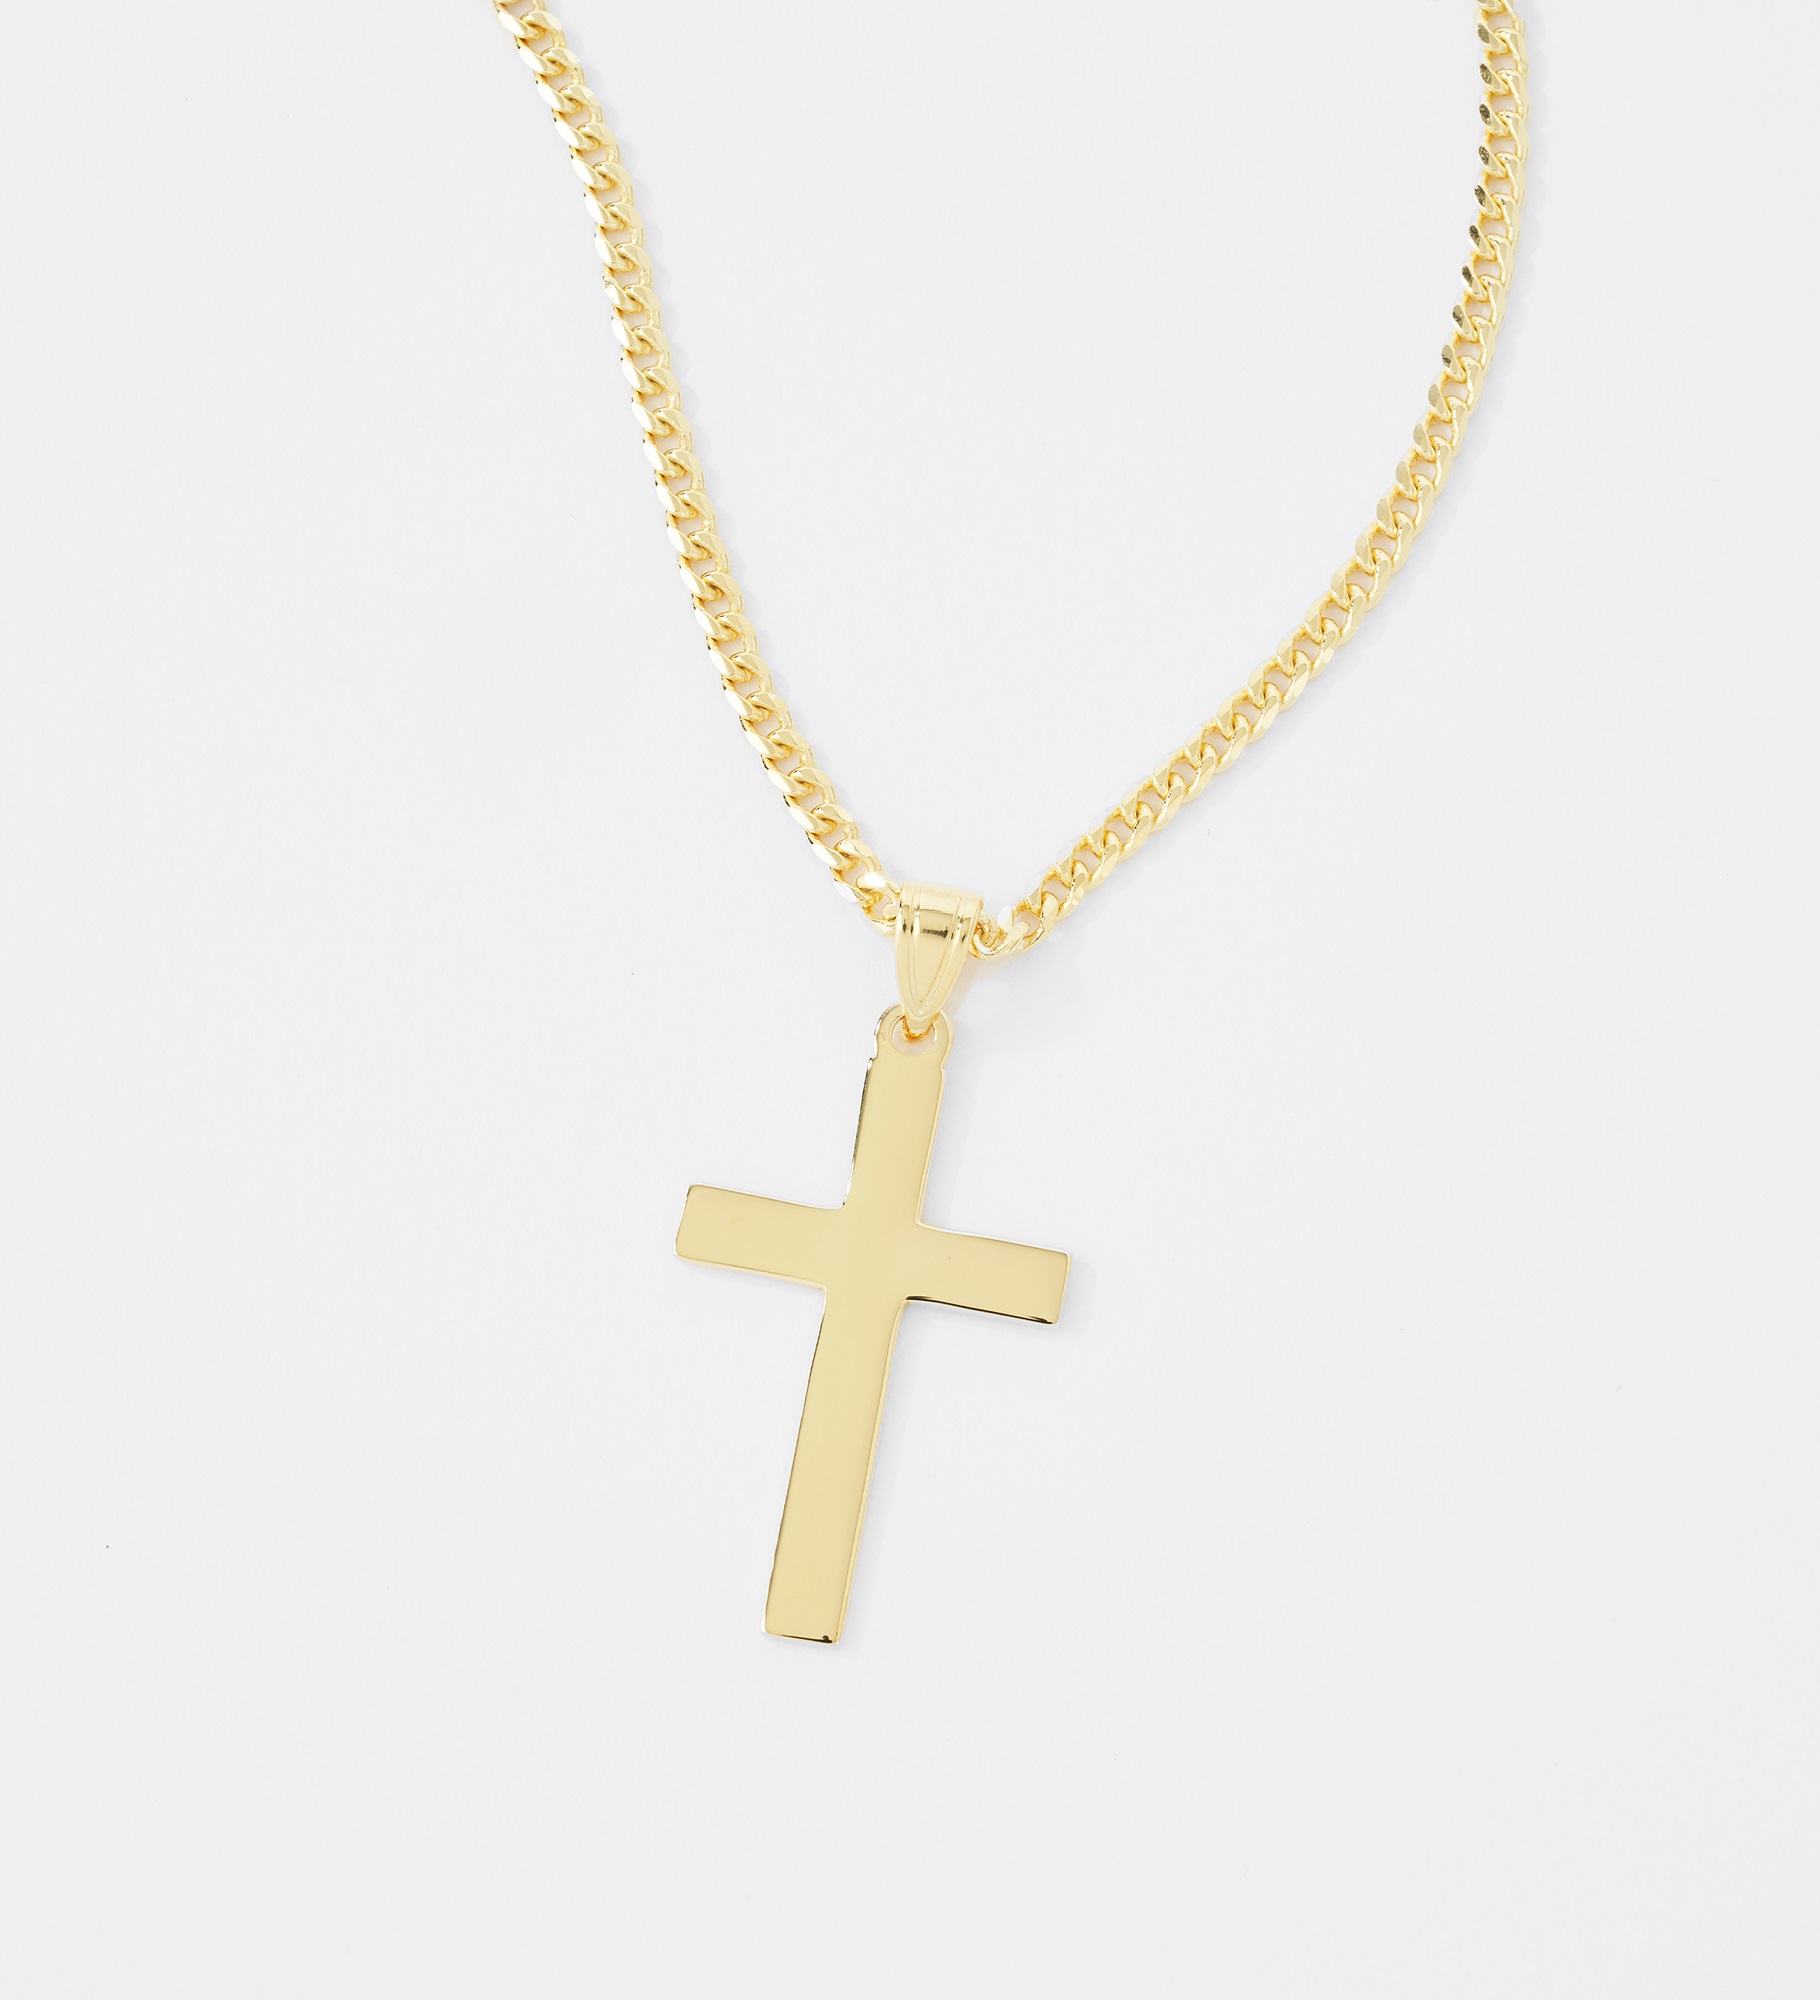  Engraved Gold Cross Necklace